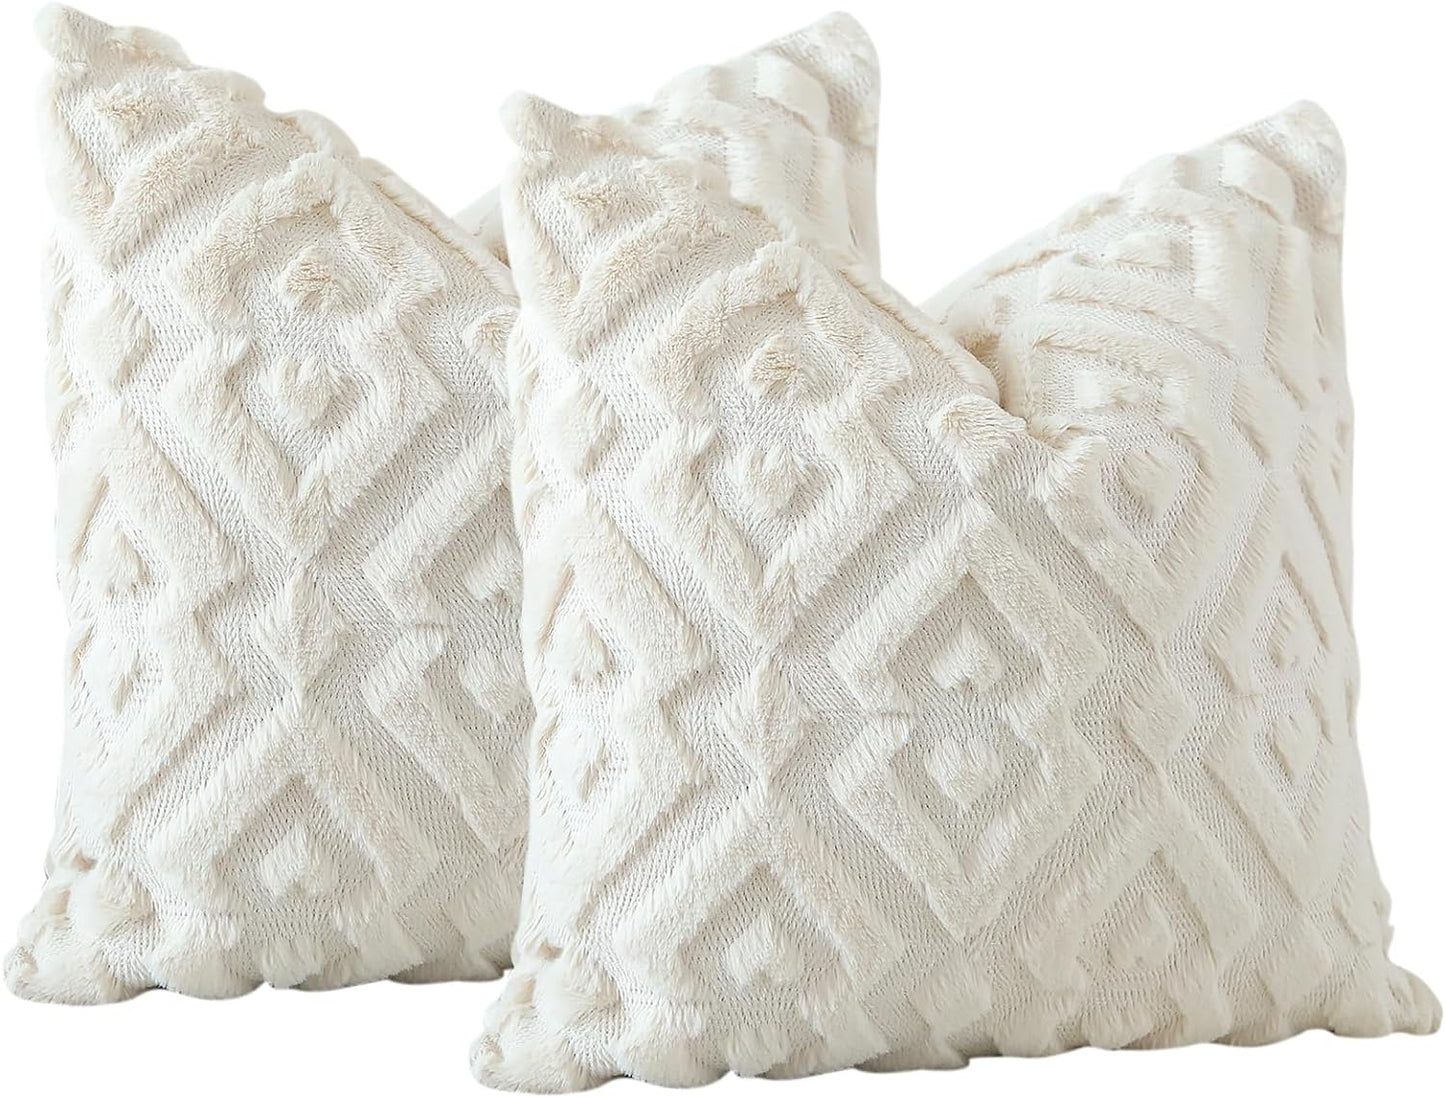 "Fluffy Clouds of Comfort: Double Trouble Softie Pillow Covers - The Ultimate Snuggle Buddies for your Sofa, Bed, or even your Car! (Color: Yawn-inducing Beige)"